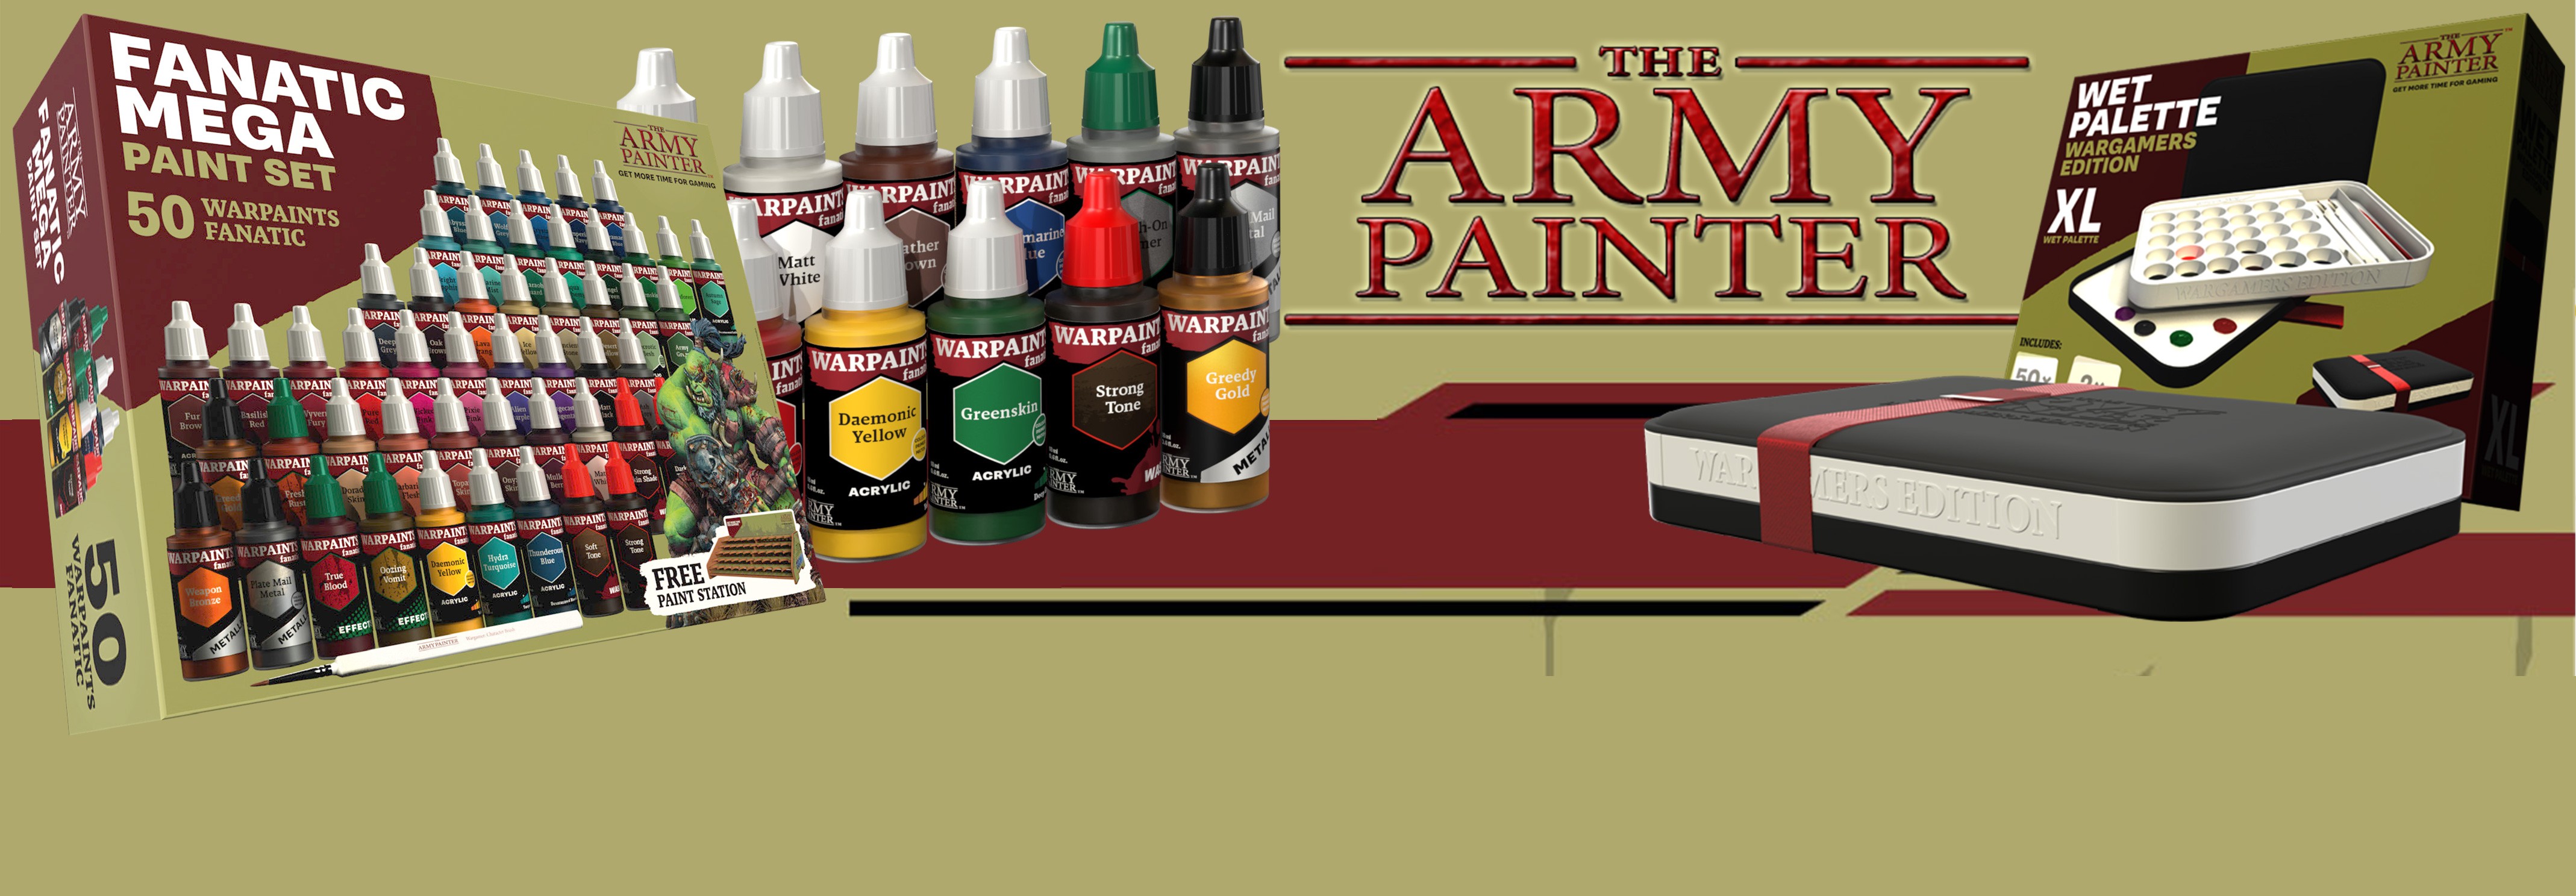 Army painter